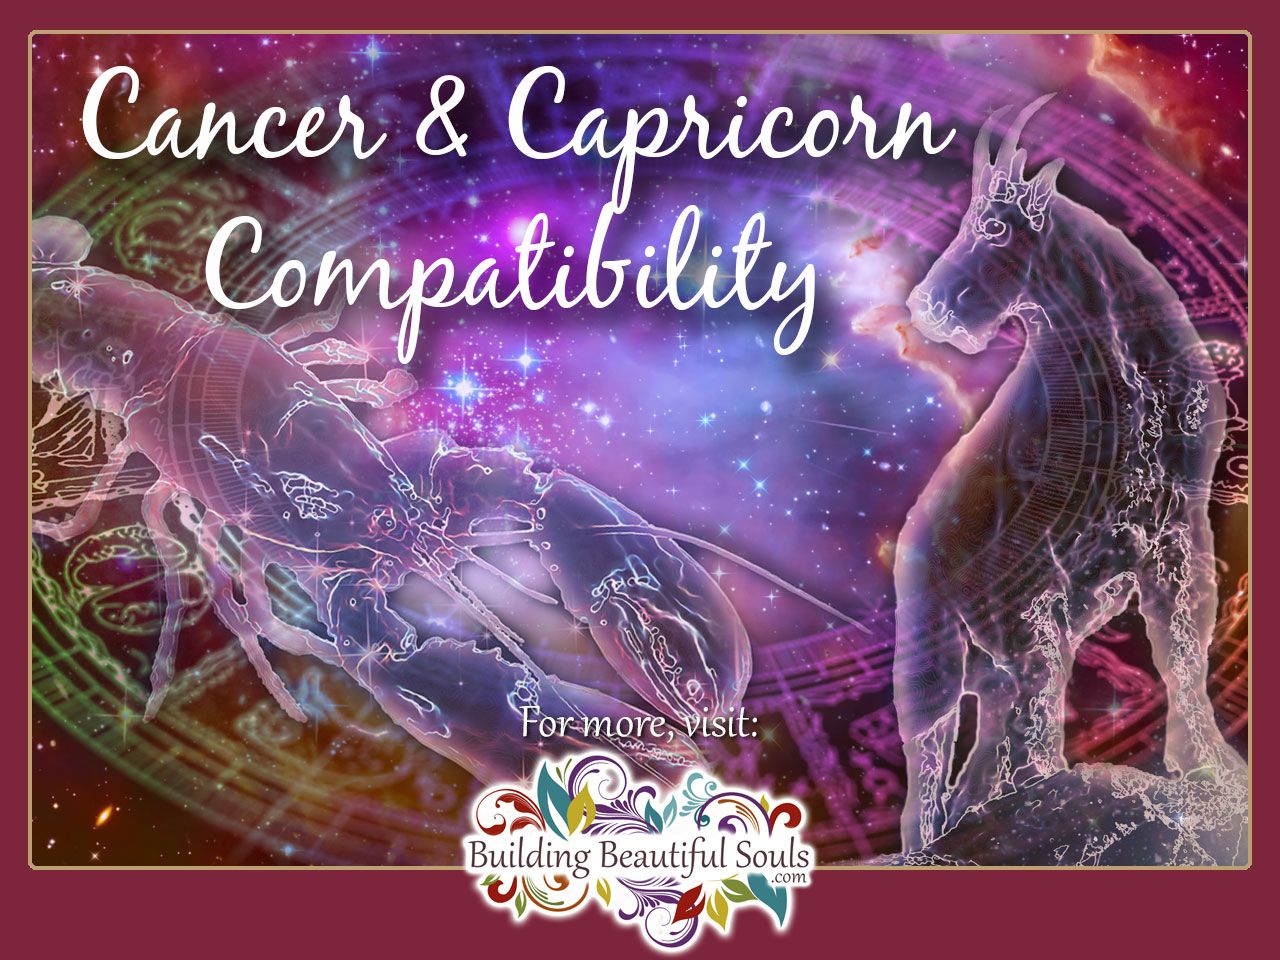 Cancer And Capricorn: A Friendship?